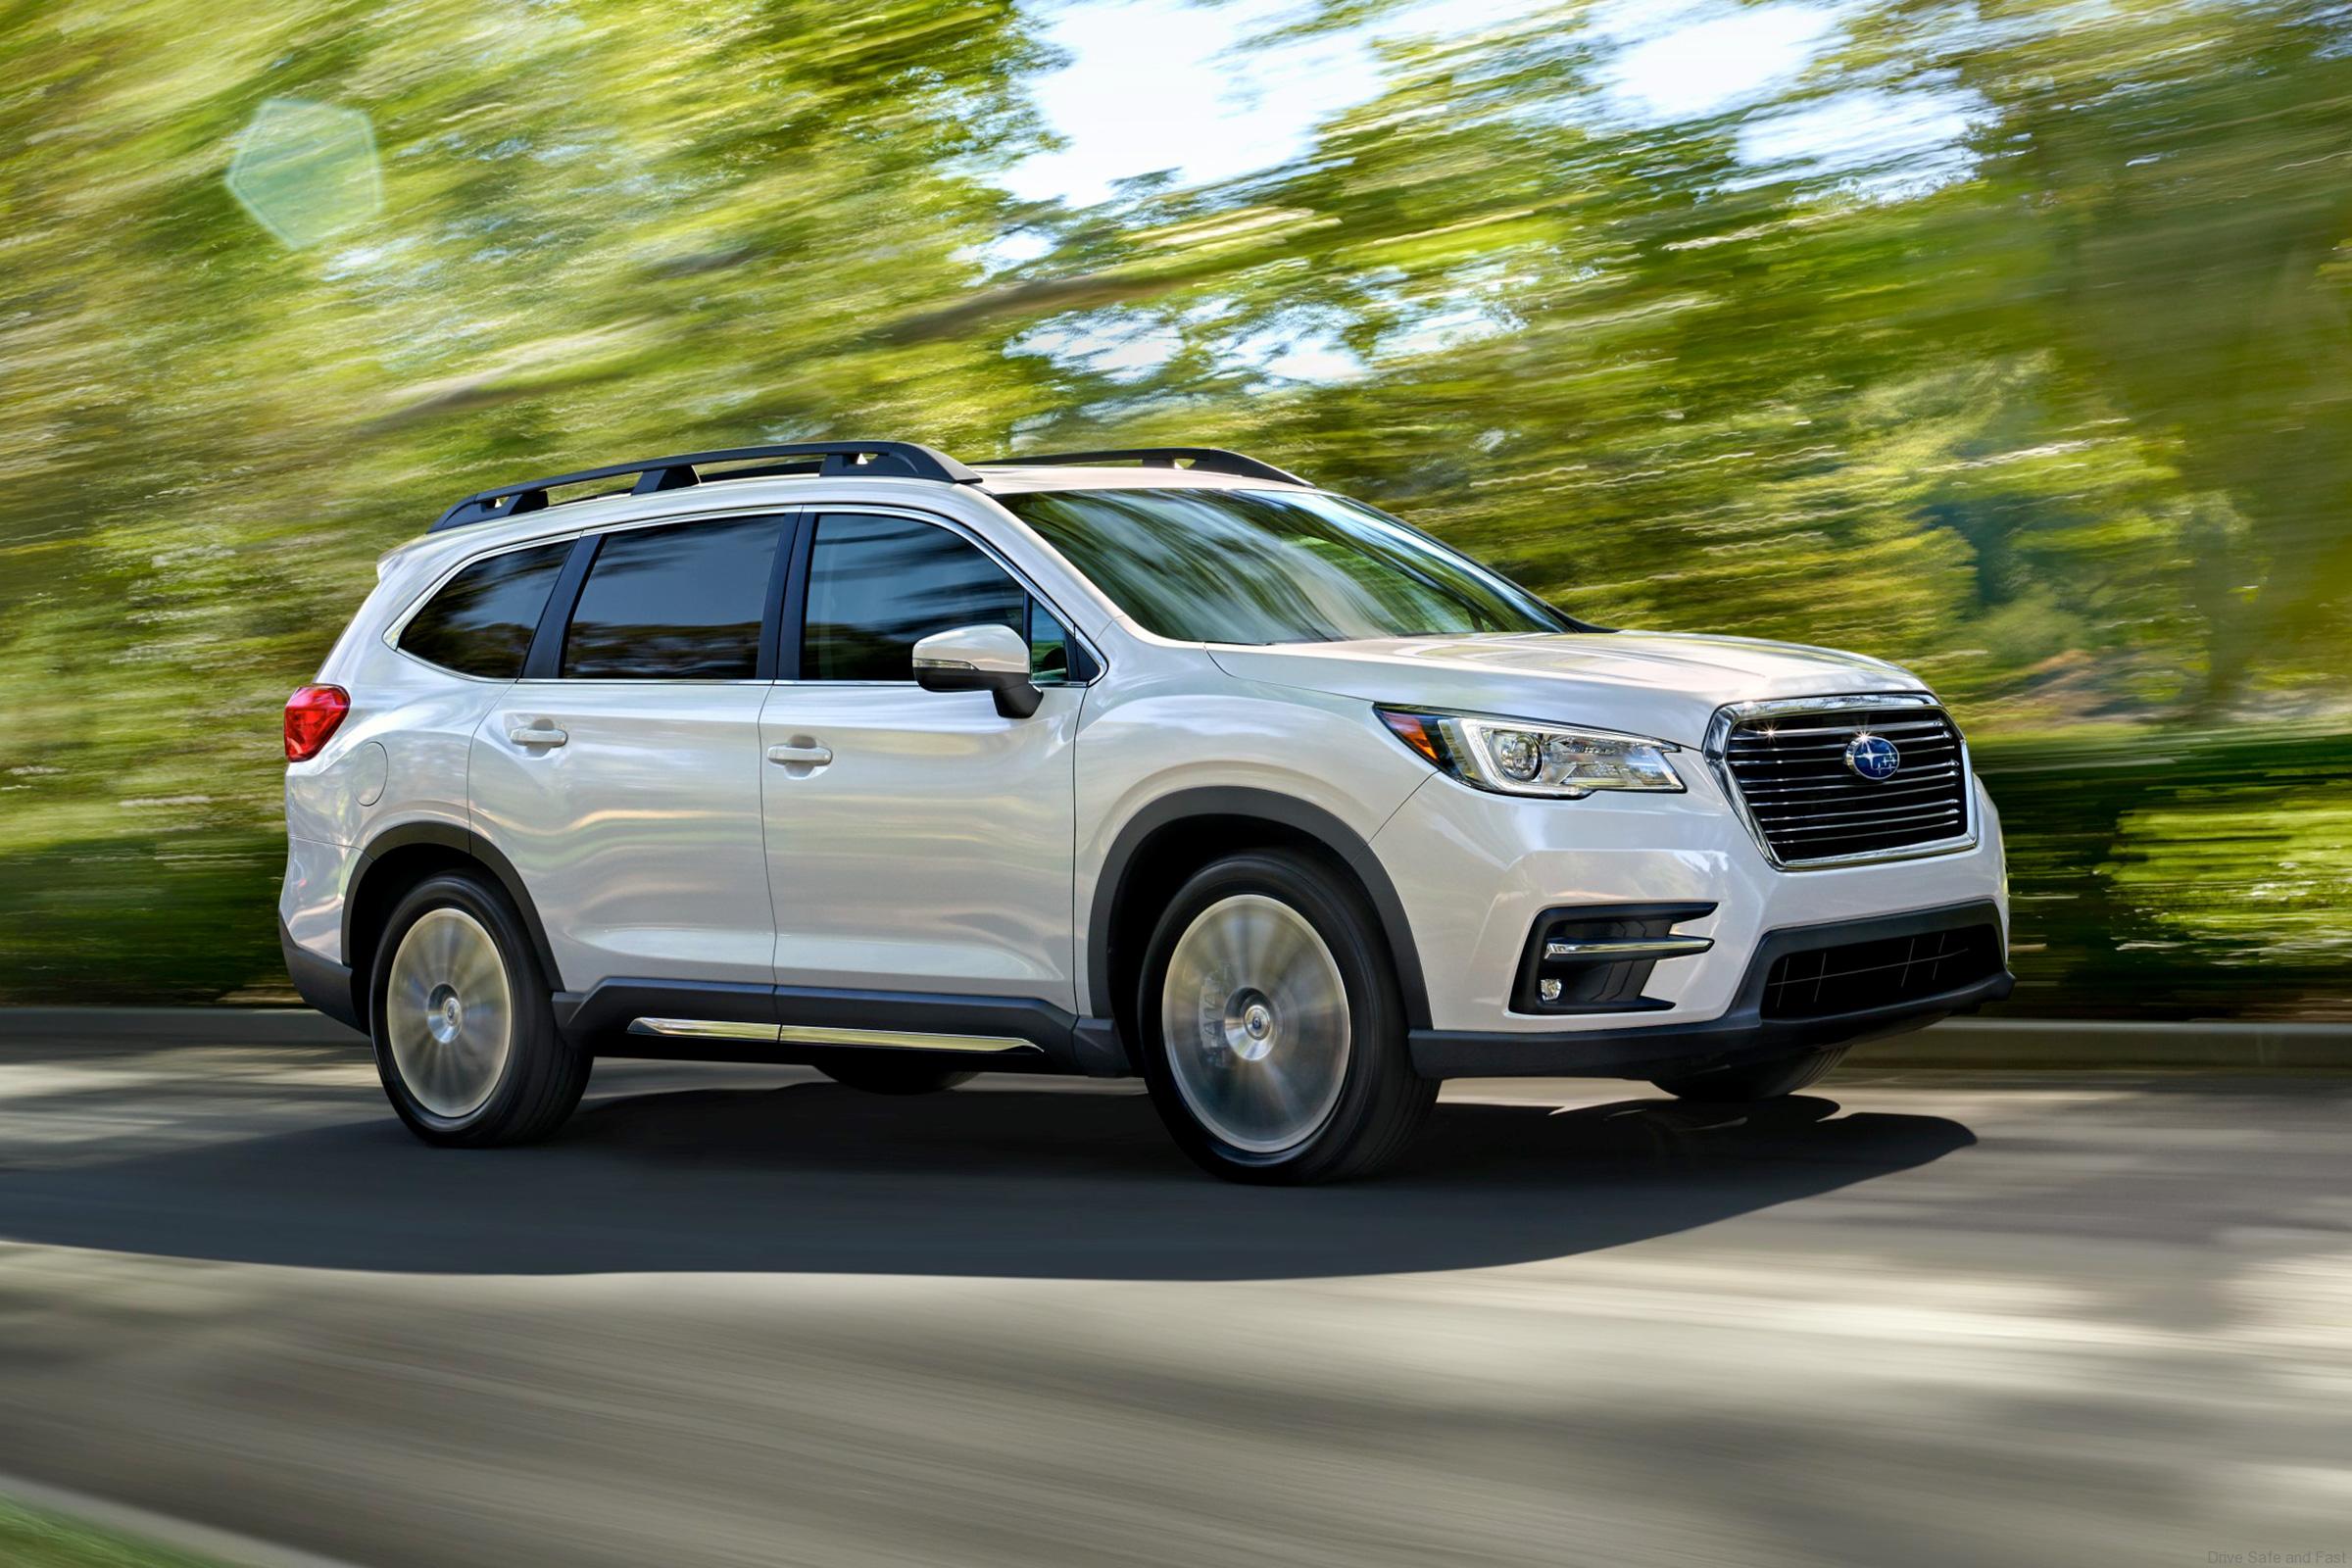 Meet the Mighty Subaru Ascent SUV – Drive Safe and Fast